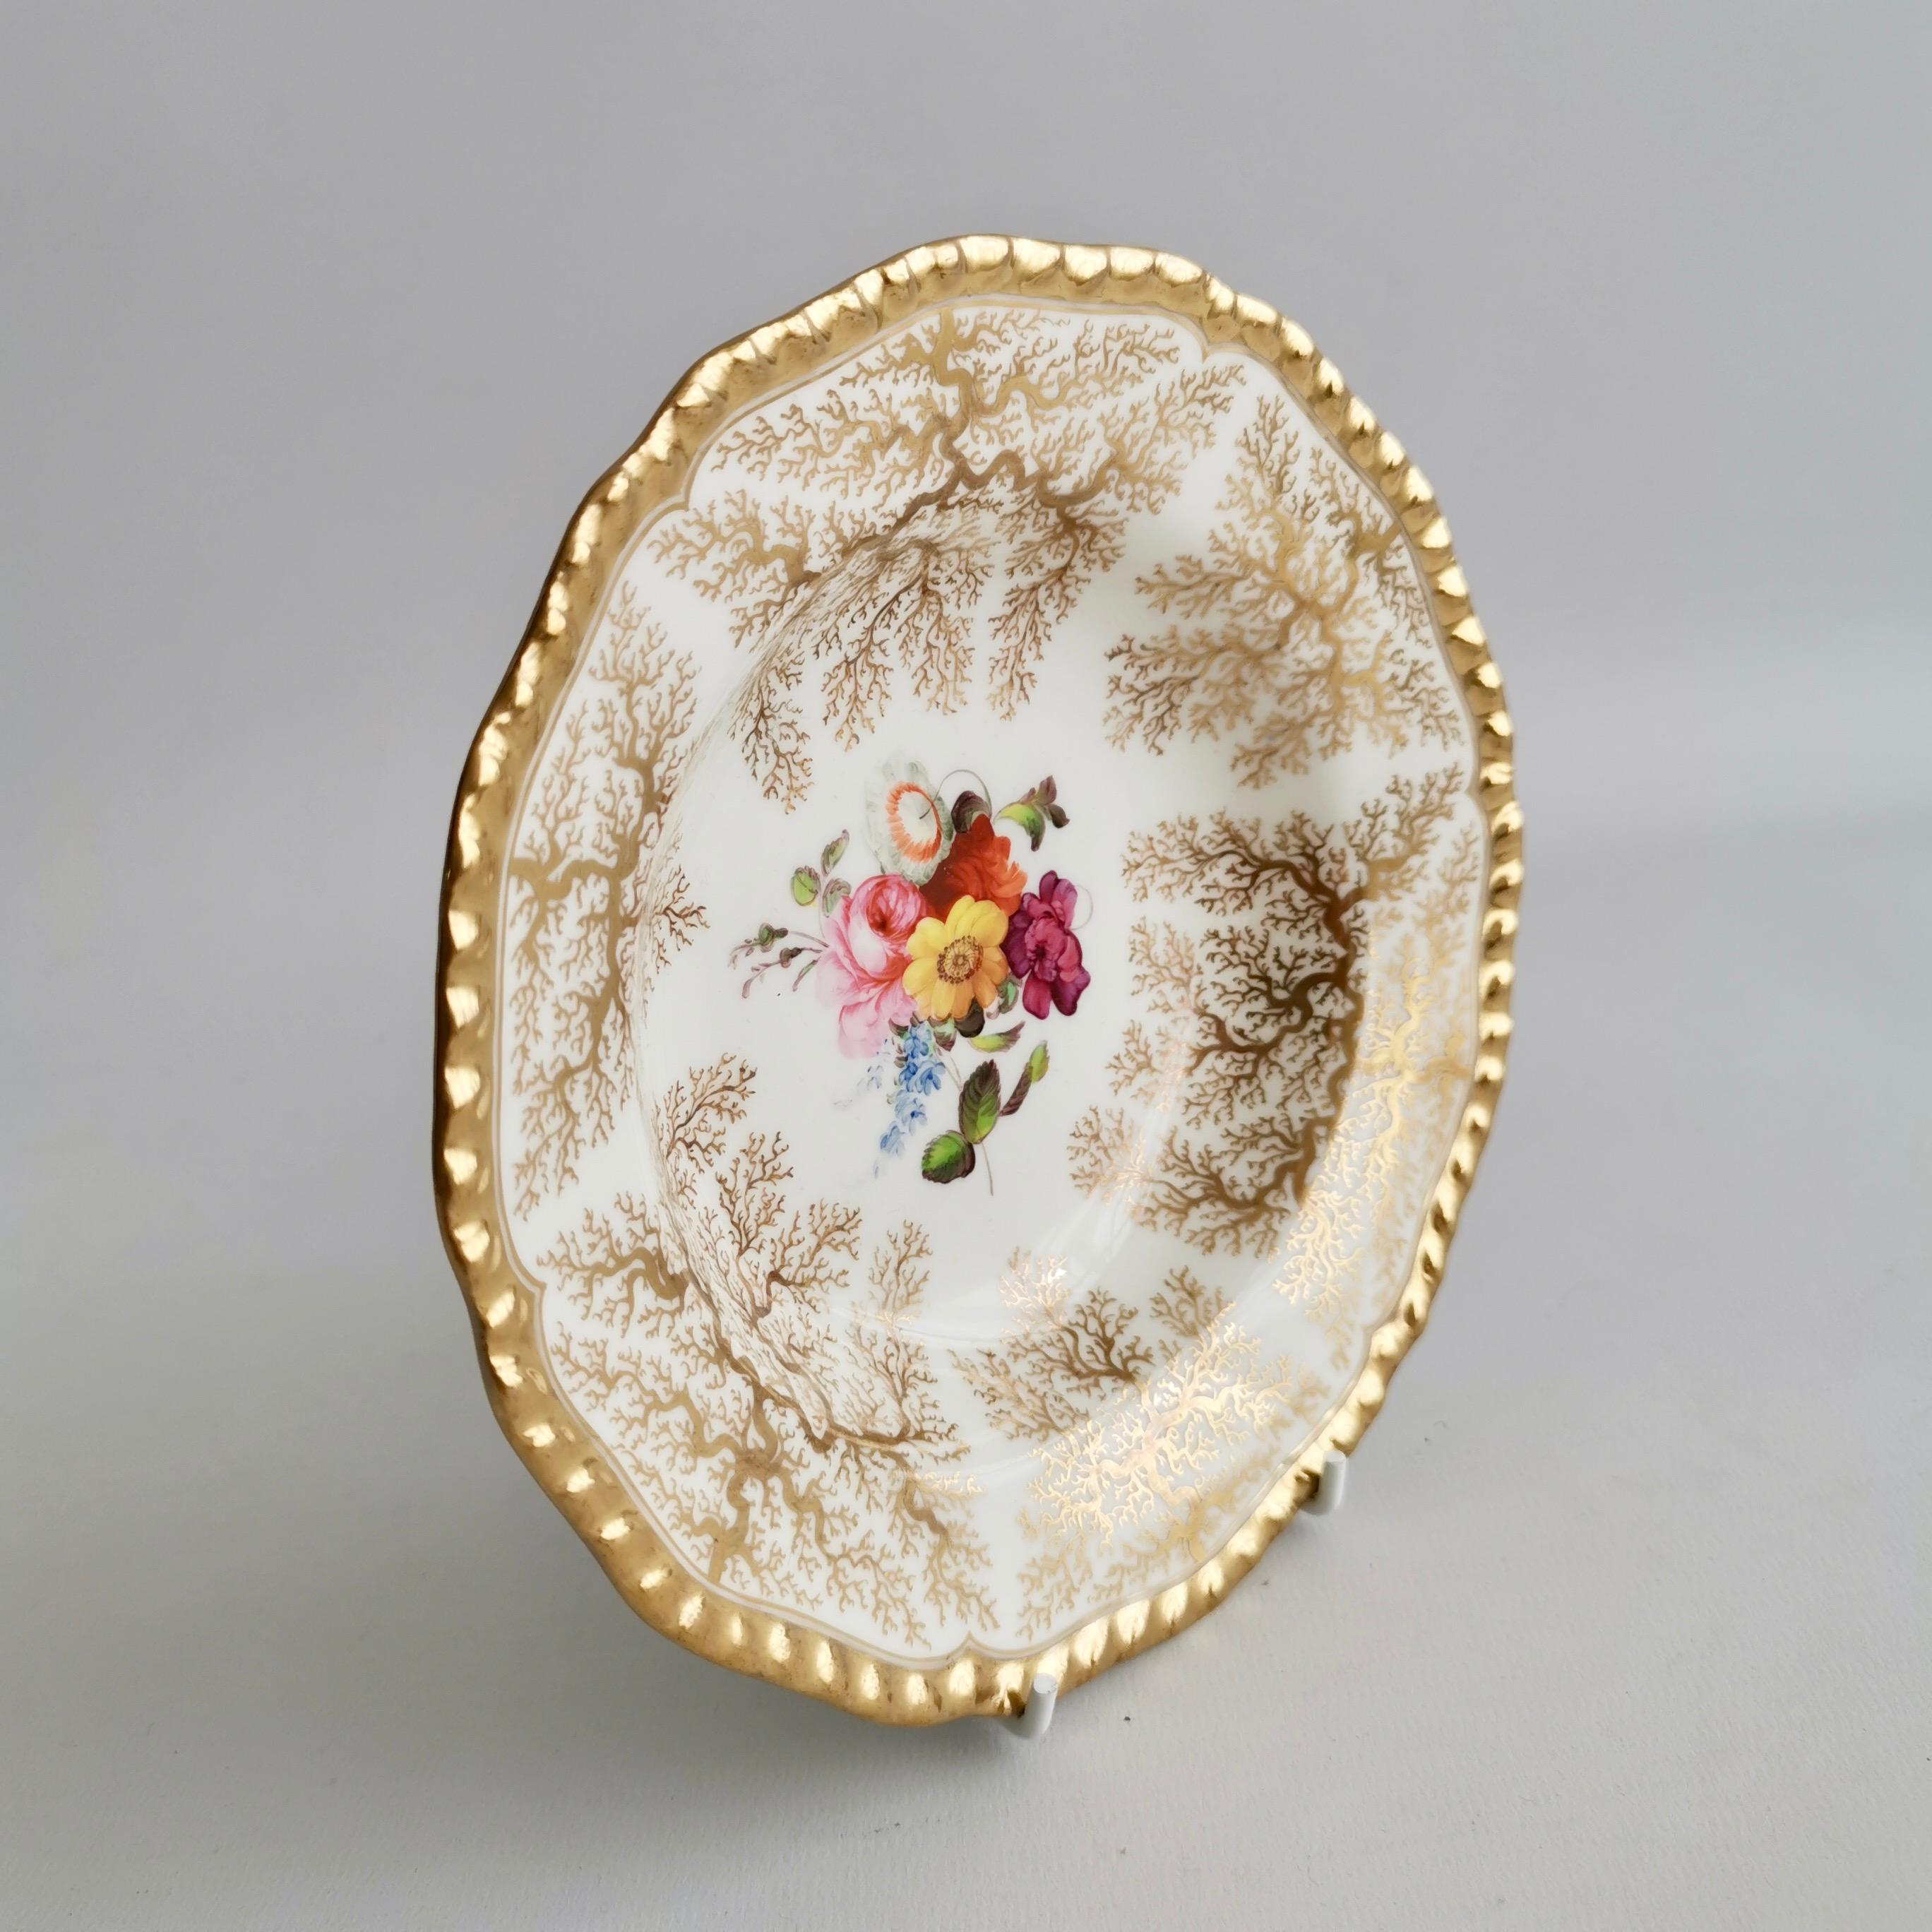 This is a beautiful small bowl made by Flight, Barr & Barr between 1816 and 1820. The bowl is decorated with the characteristic gilt seaweed pattern.

It is a mystery what this bowl was for; it is an unusual size. If bigger, you could say it's a